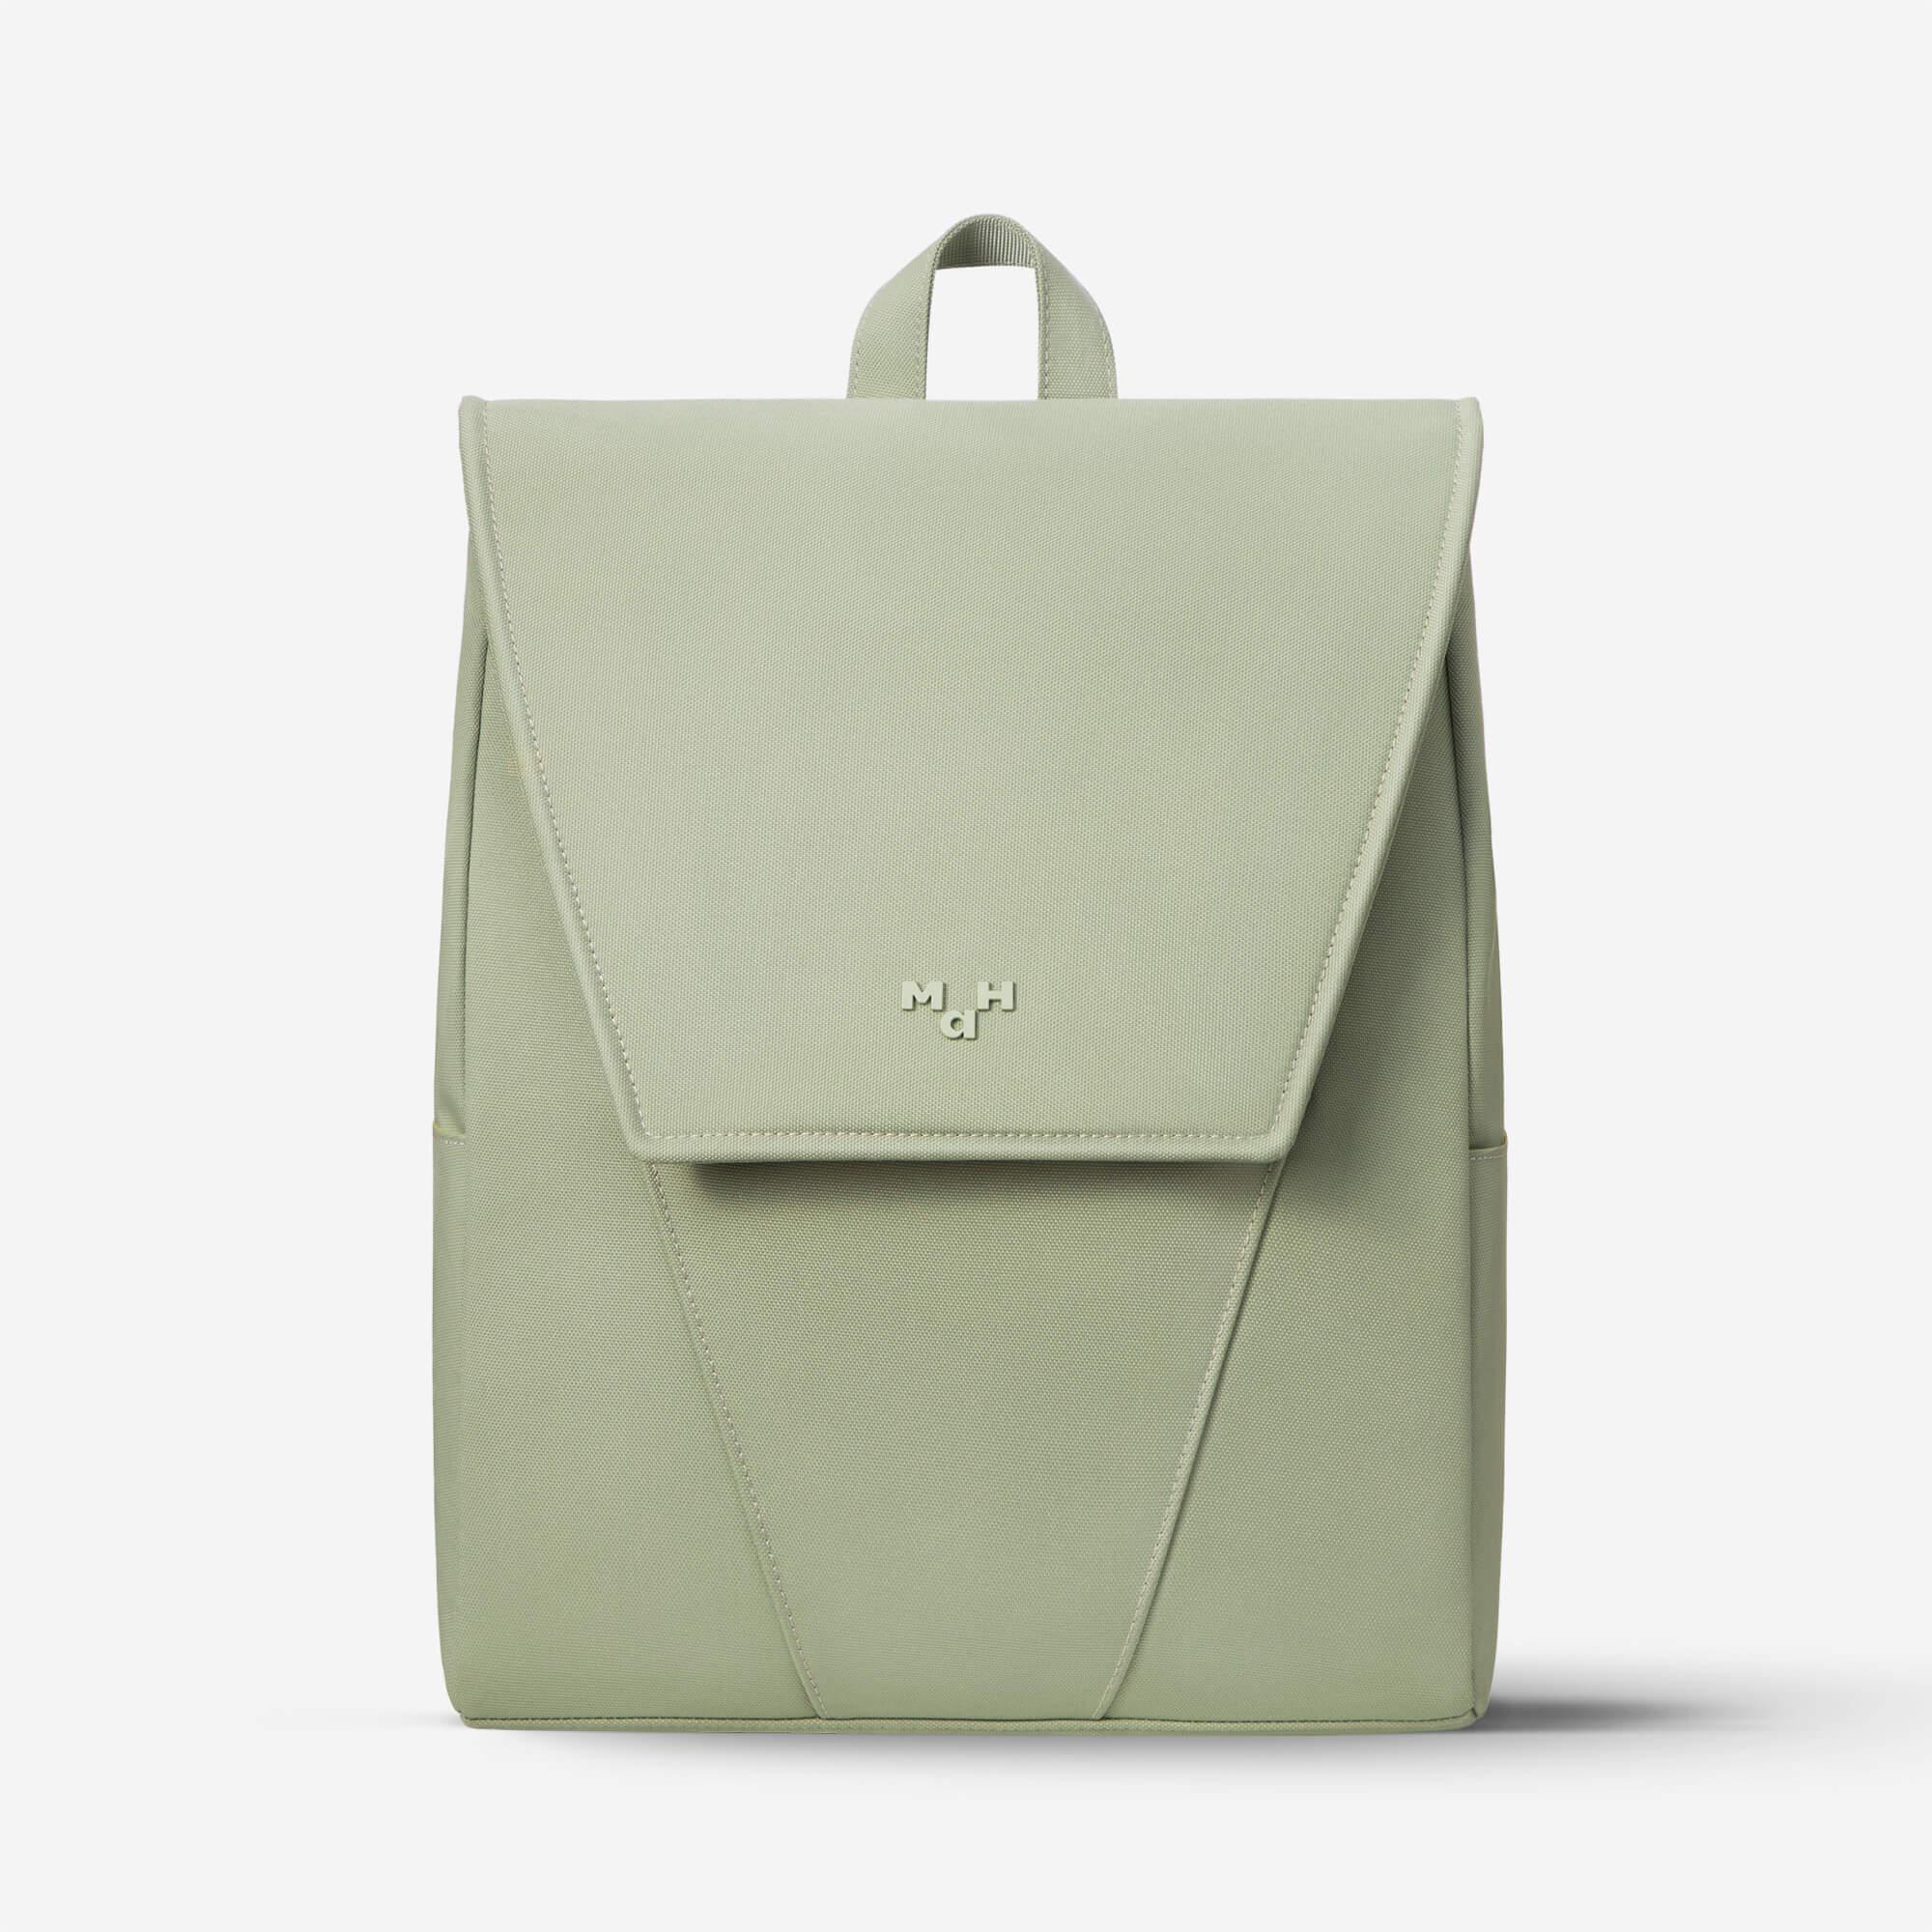 Minimalist Backpack For Daily Use